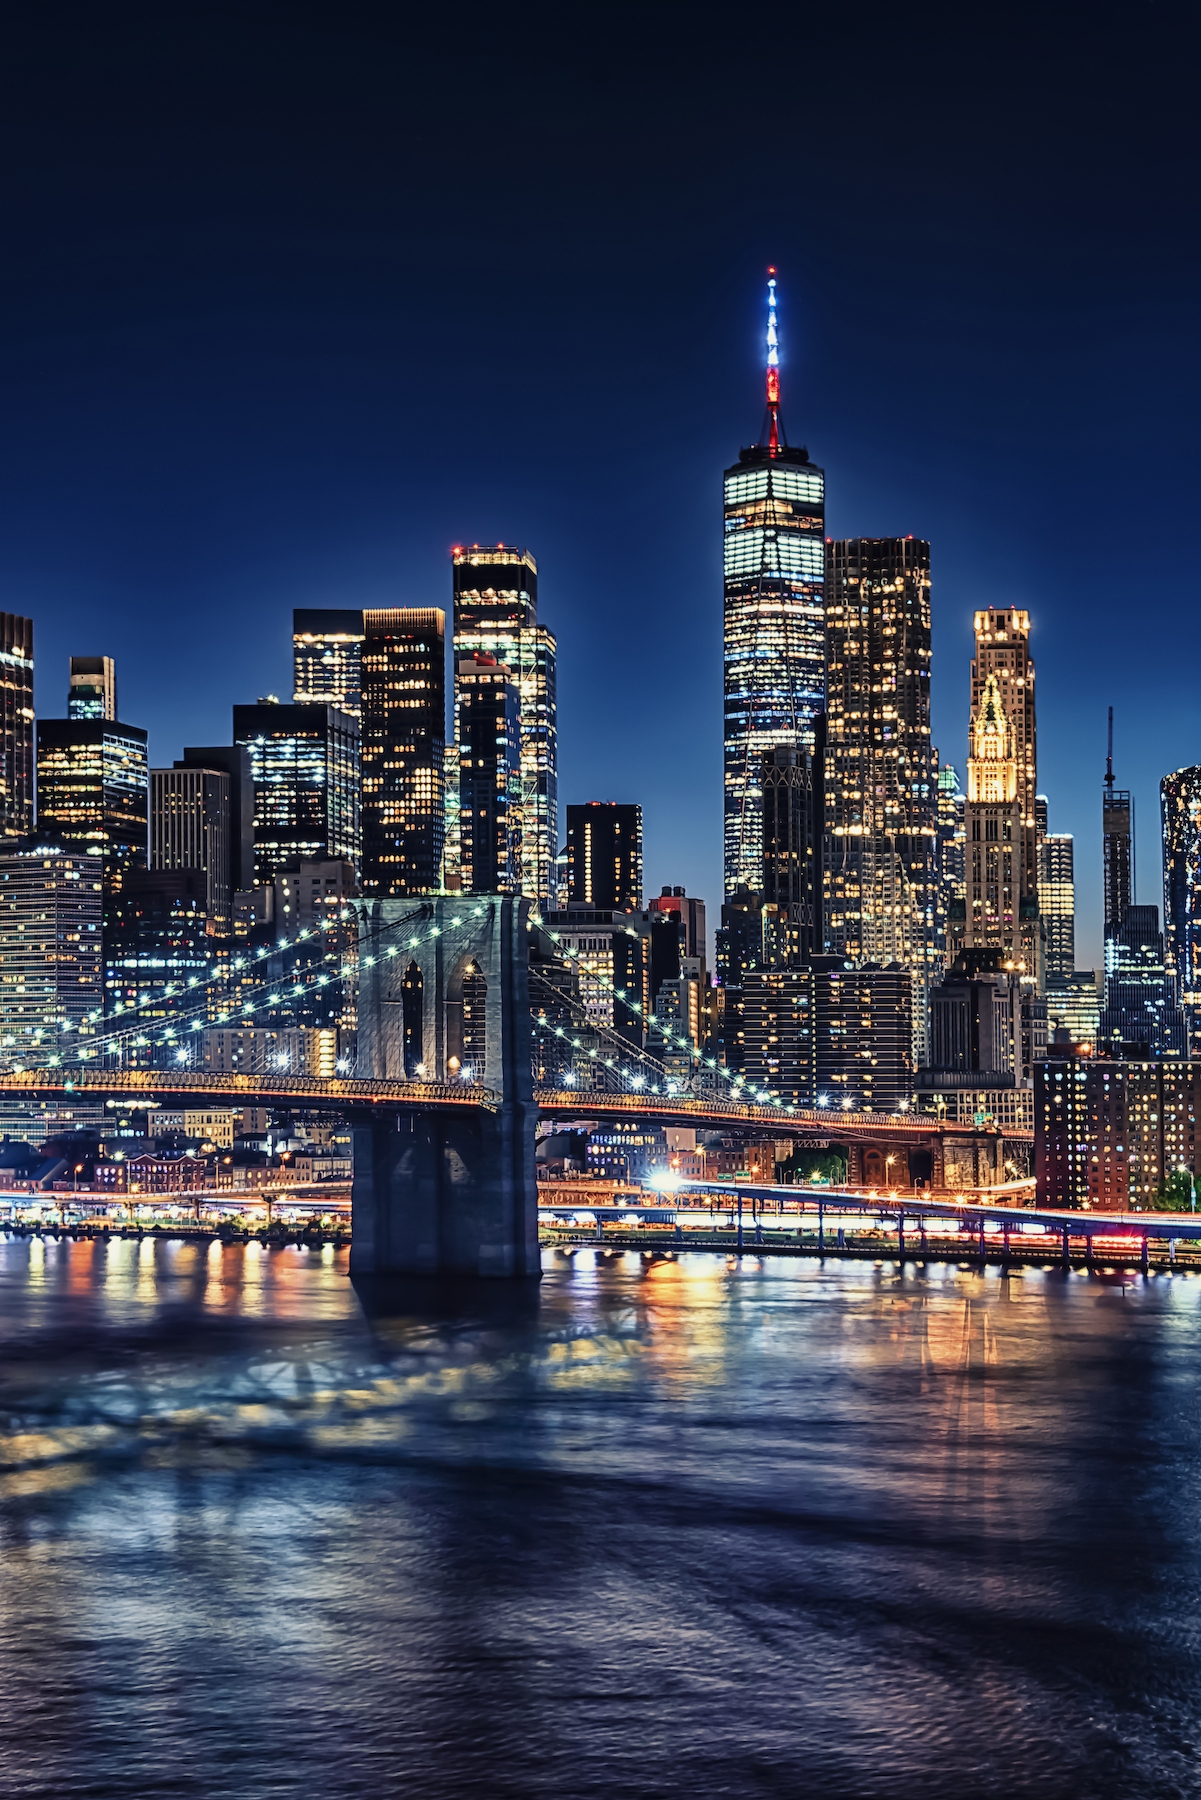 New York by Night Wallpaper | Happywall